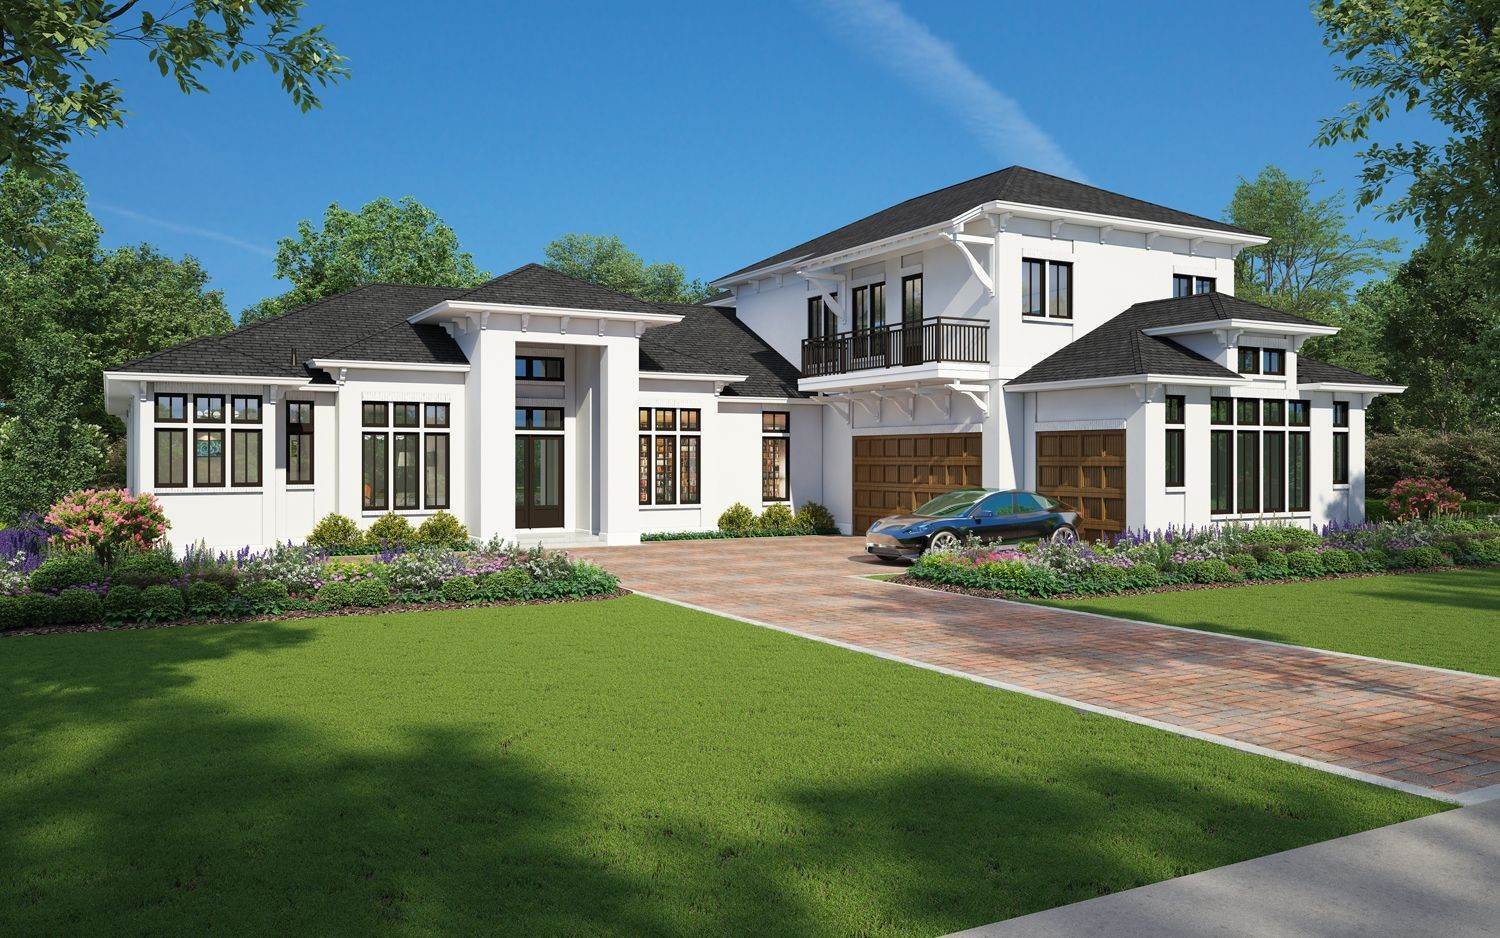 Single Family Homes for Sale at Custom New Construction Home With Three Car Garage Overlooking Golf Course 3526 Burnt Pine Lane Miramar Beach, Florida 32550 United States